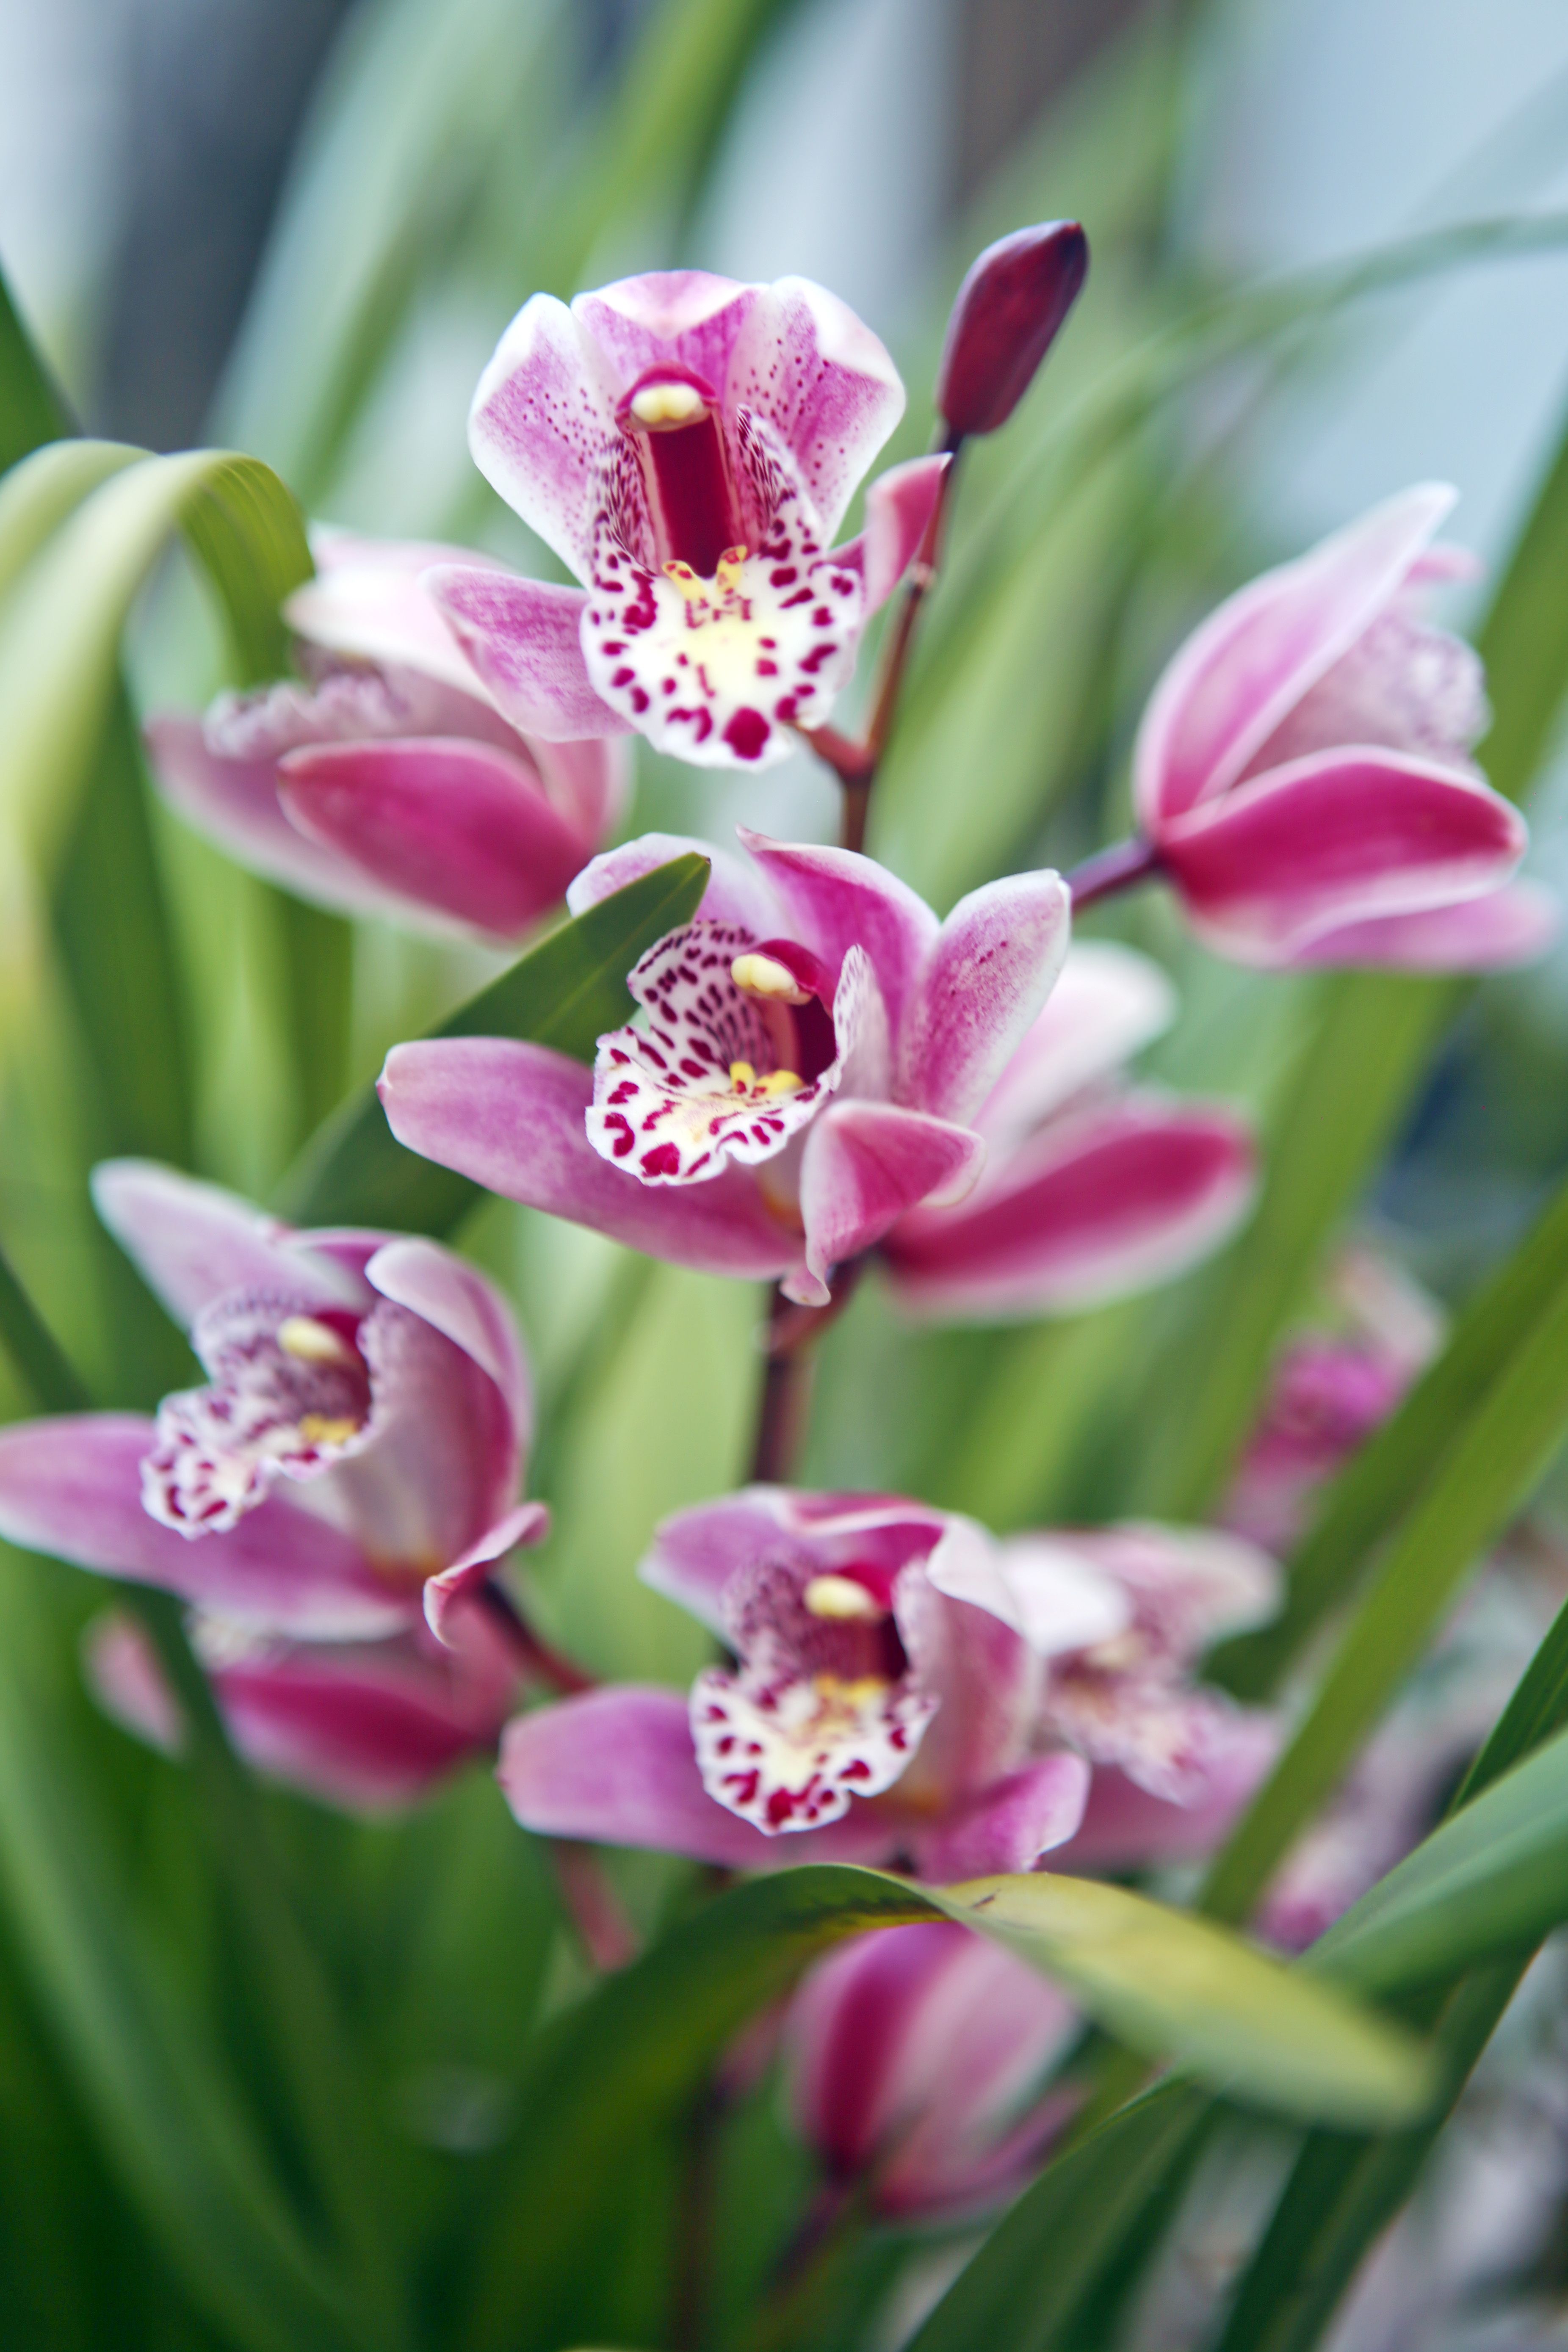 The 20 Best Types of Orchids to Buy and Grow